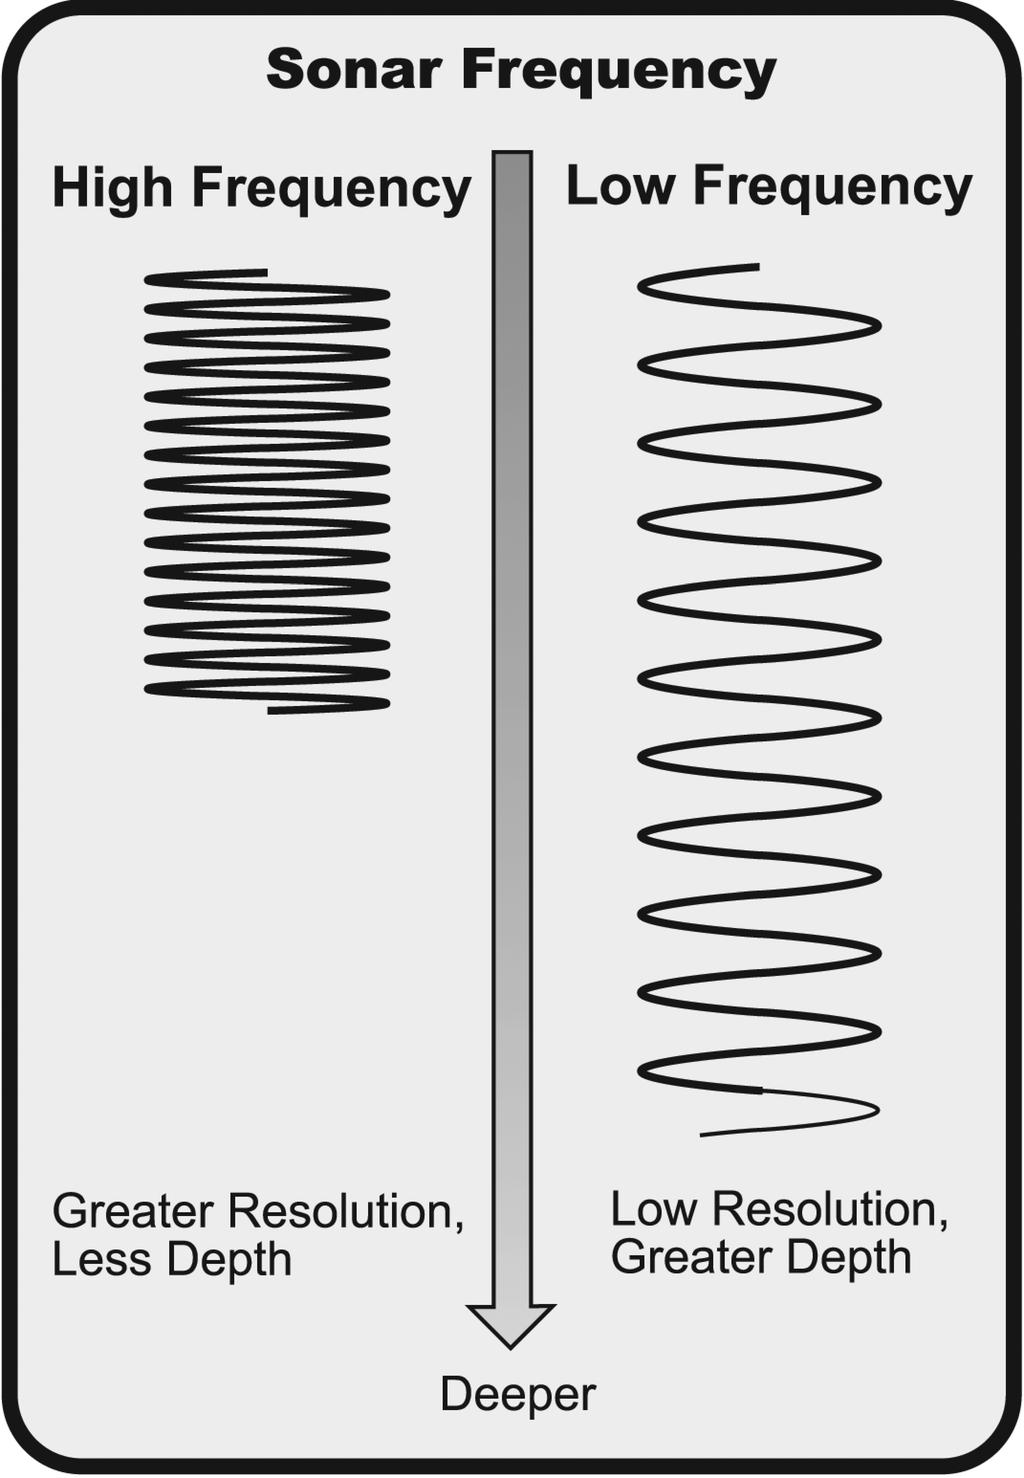 Low frequencies (83 khz) are typically used to achieve greater depth capability.